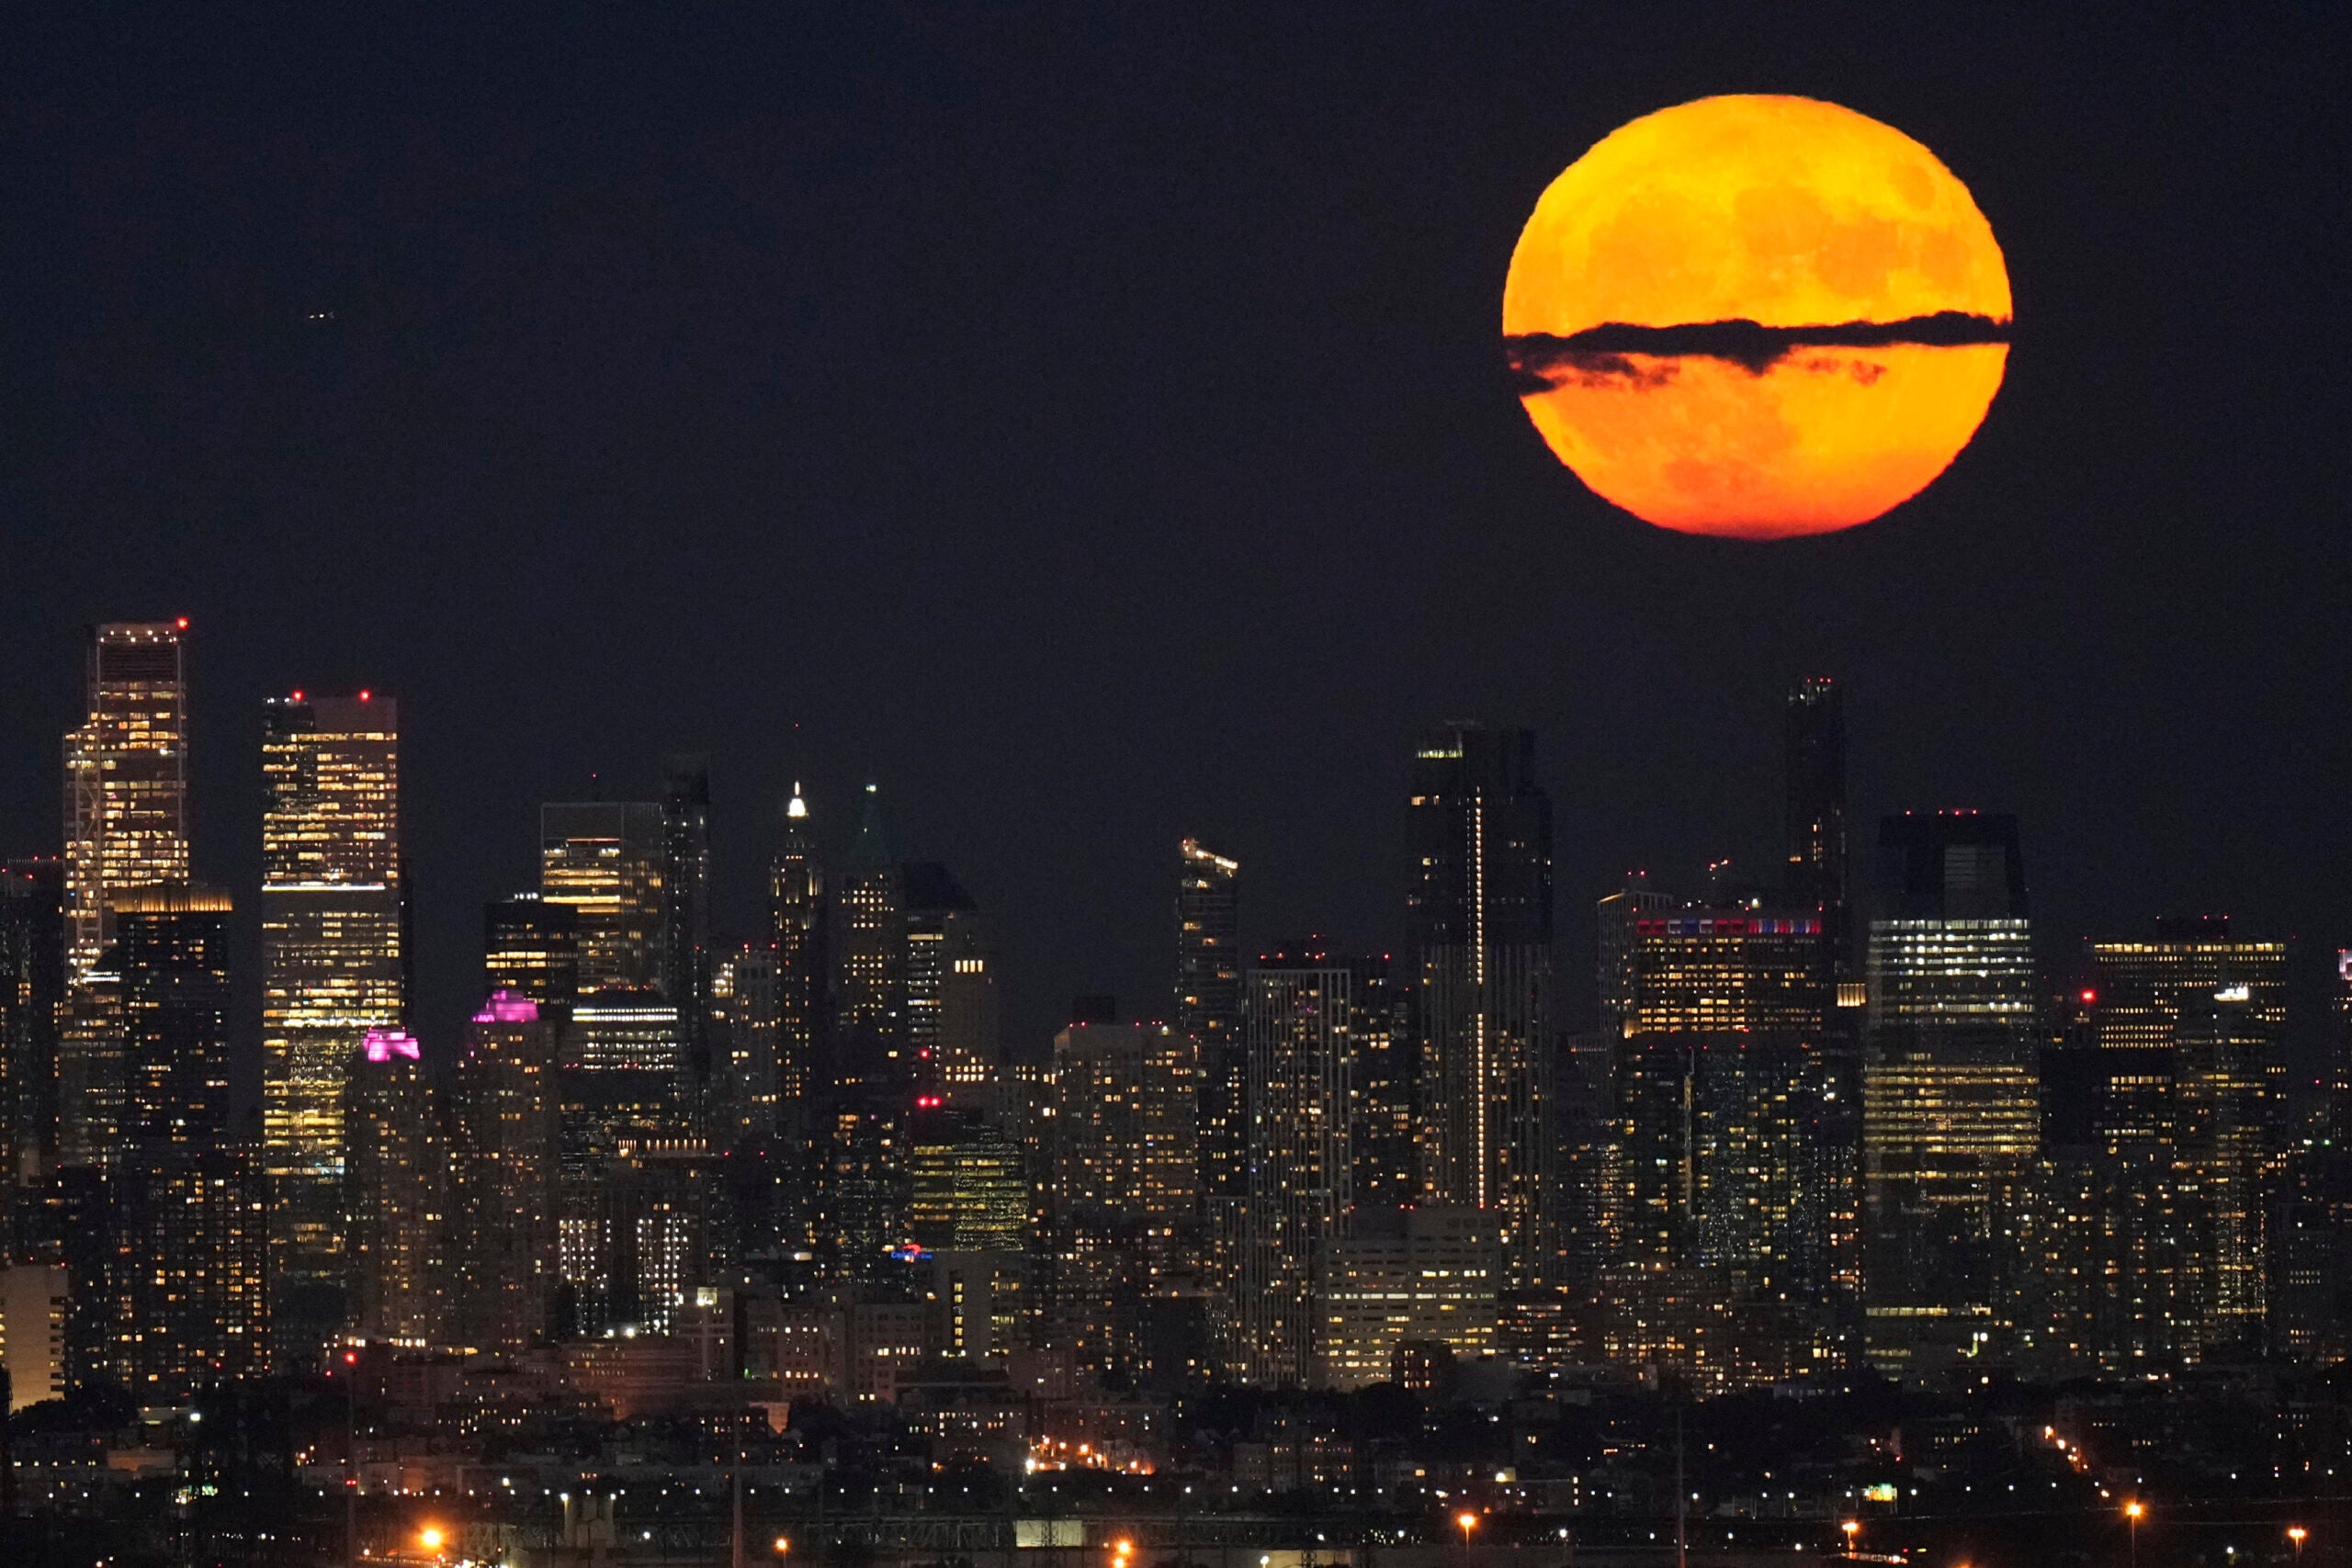 A supermoon rises through clouds over the skyline of lower Manhattan.